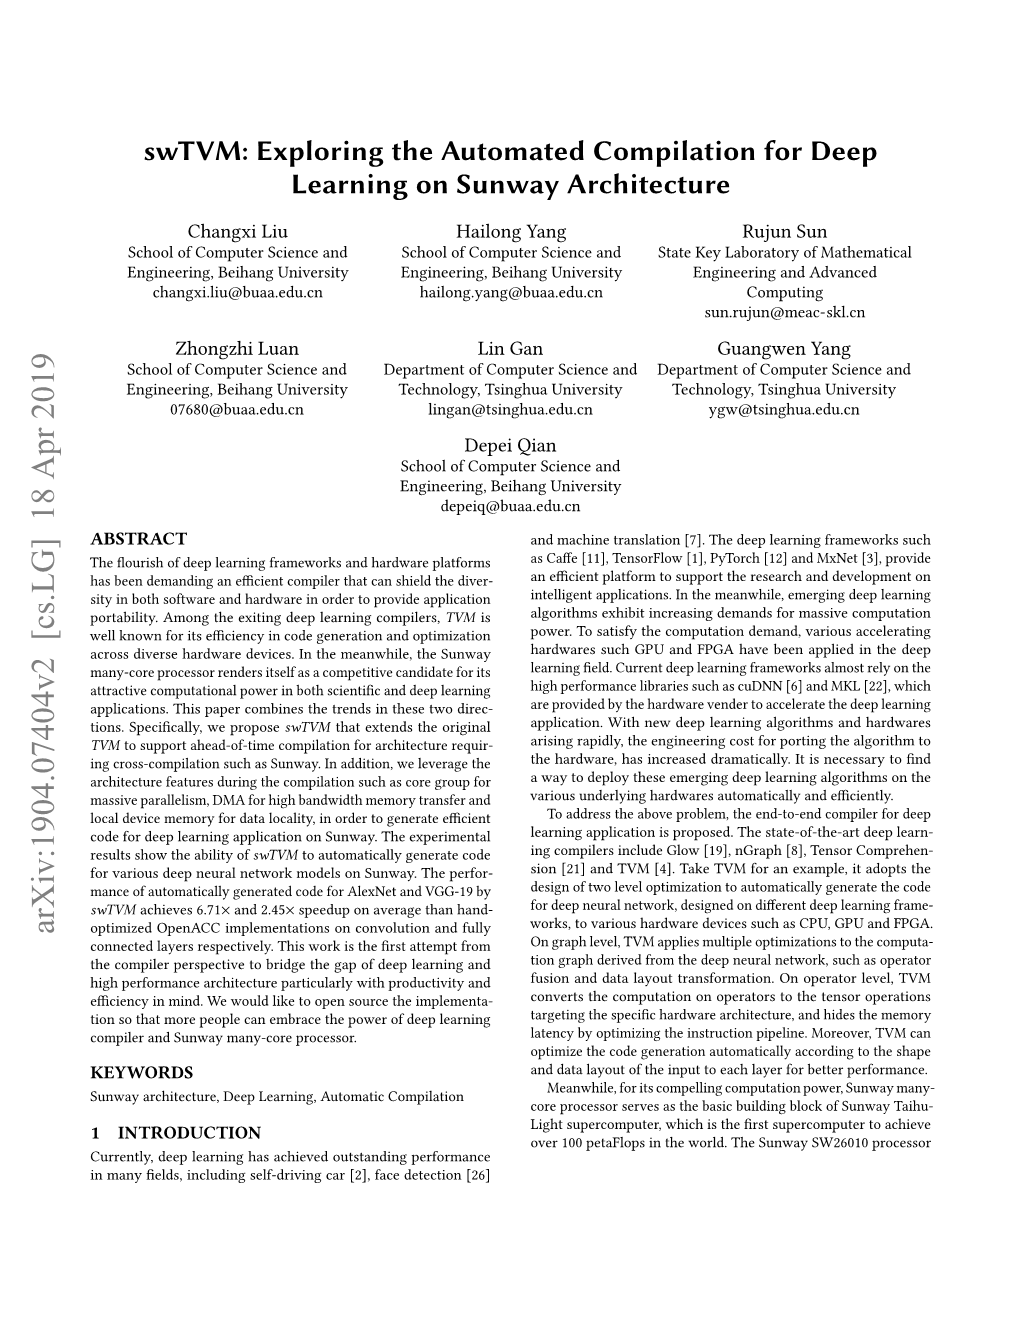 Exploring the Automated Compilation for Deep Learning on Sunway Architecture